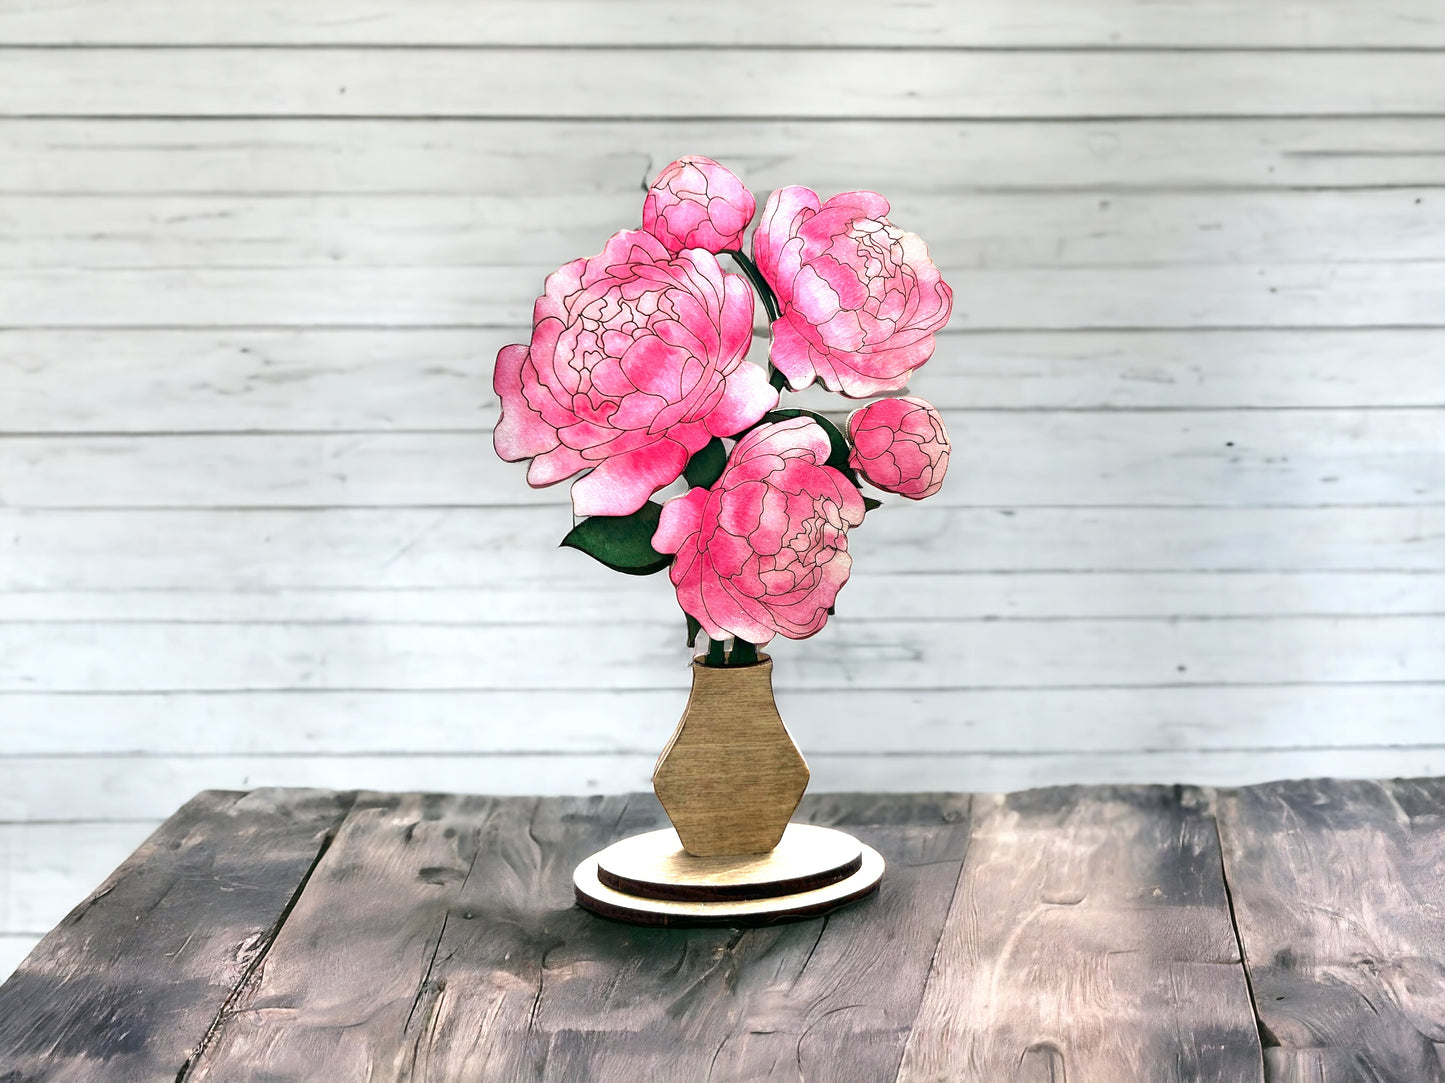 Hand-Painted Wood Peony Flowers in Vase Stand - Mother's Day Gift